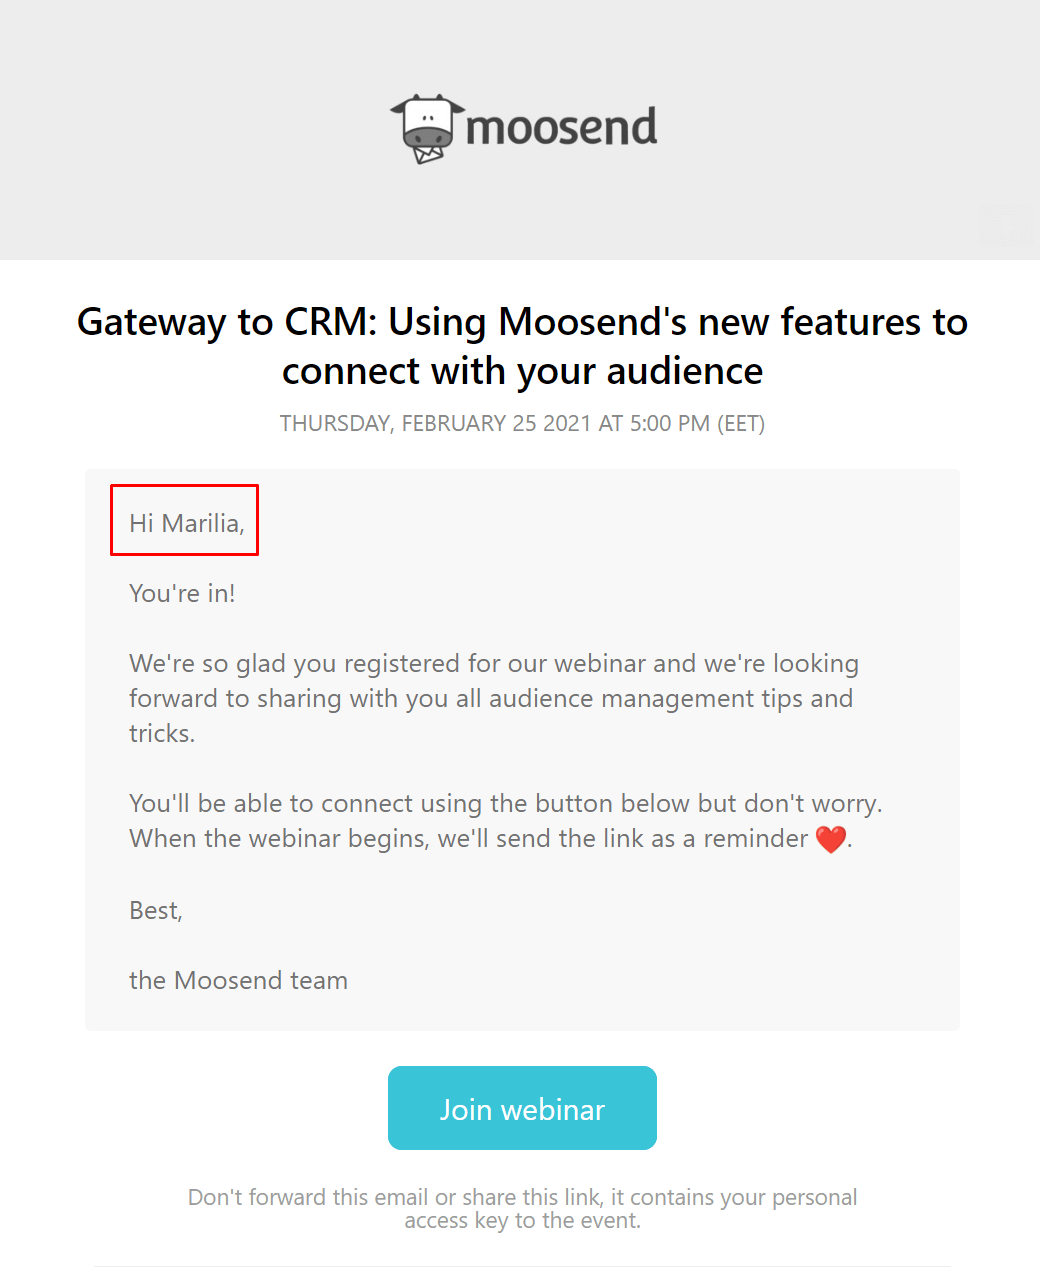 moosend upcoming event email greeting